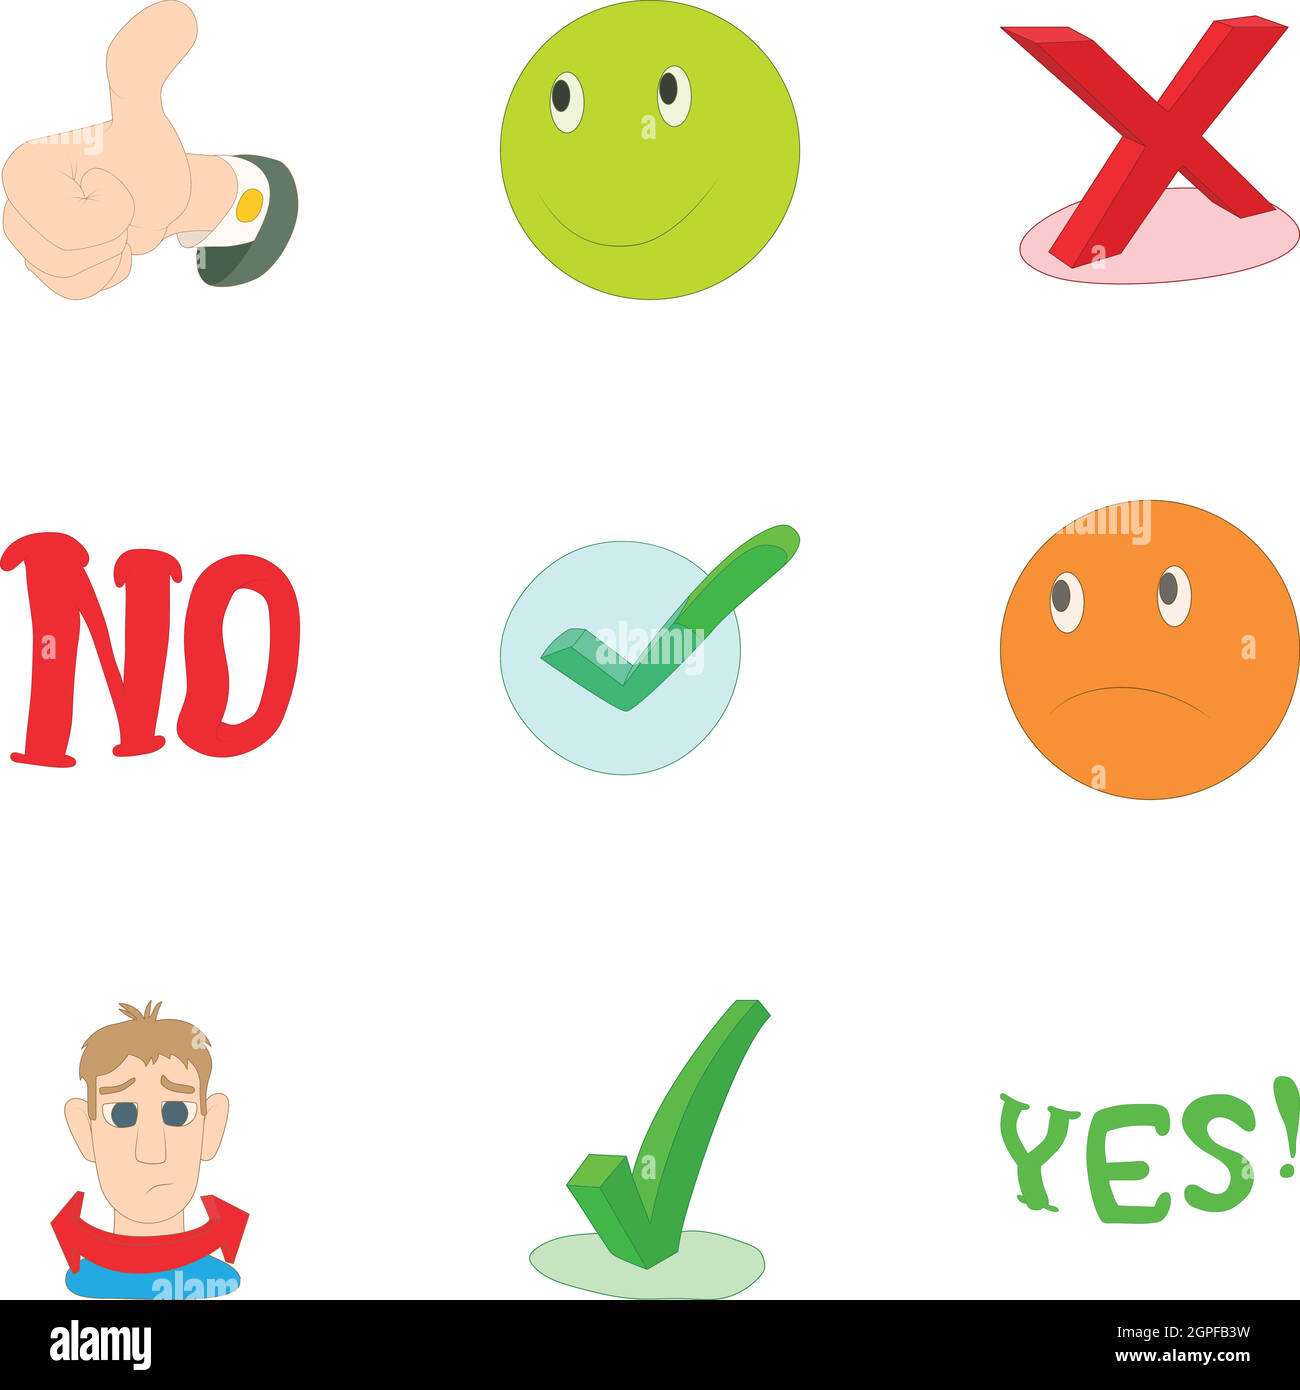 Yes no button icons set, cartoon style Stock Vector